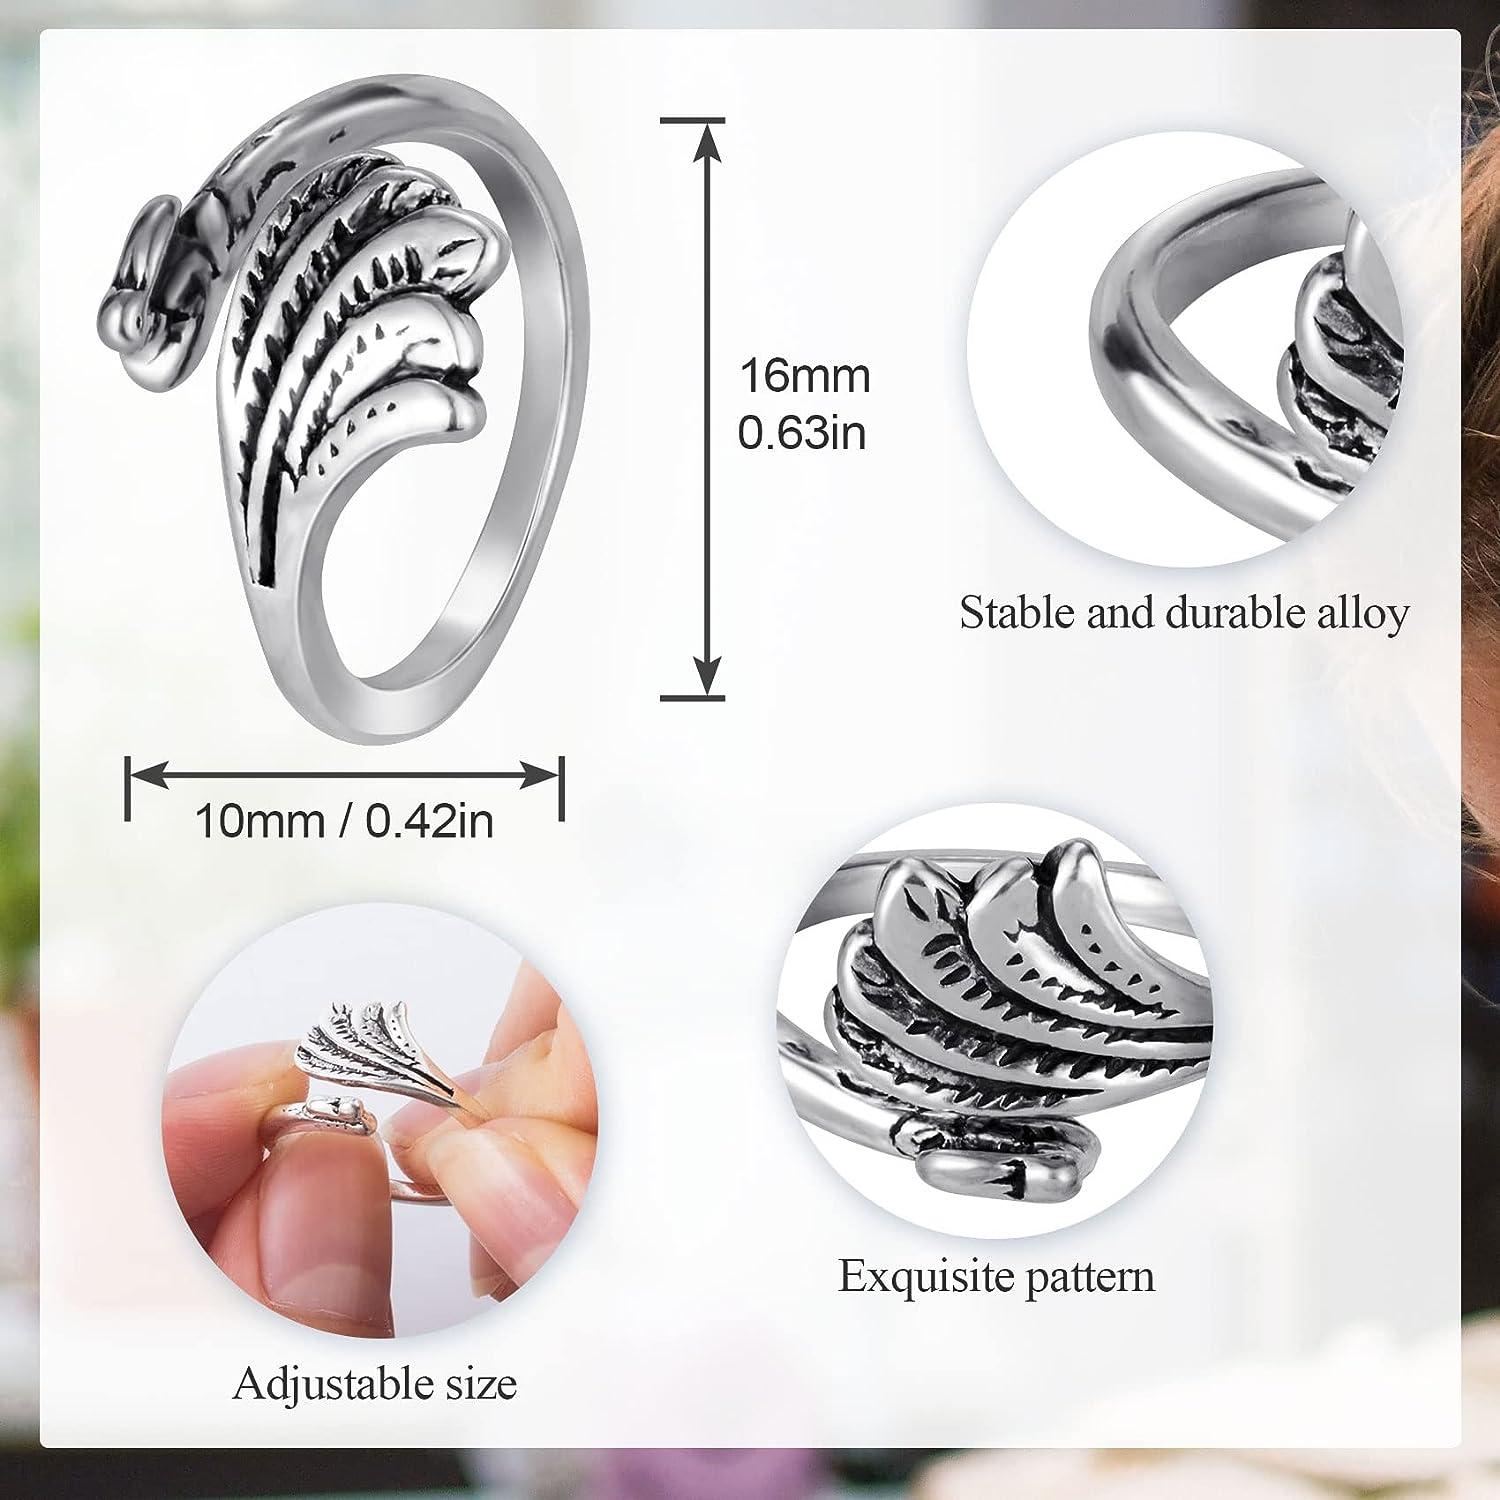 New loop style knitting crochet tension ring